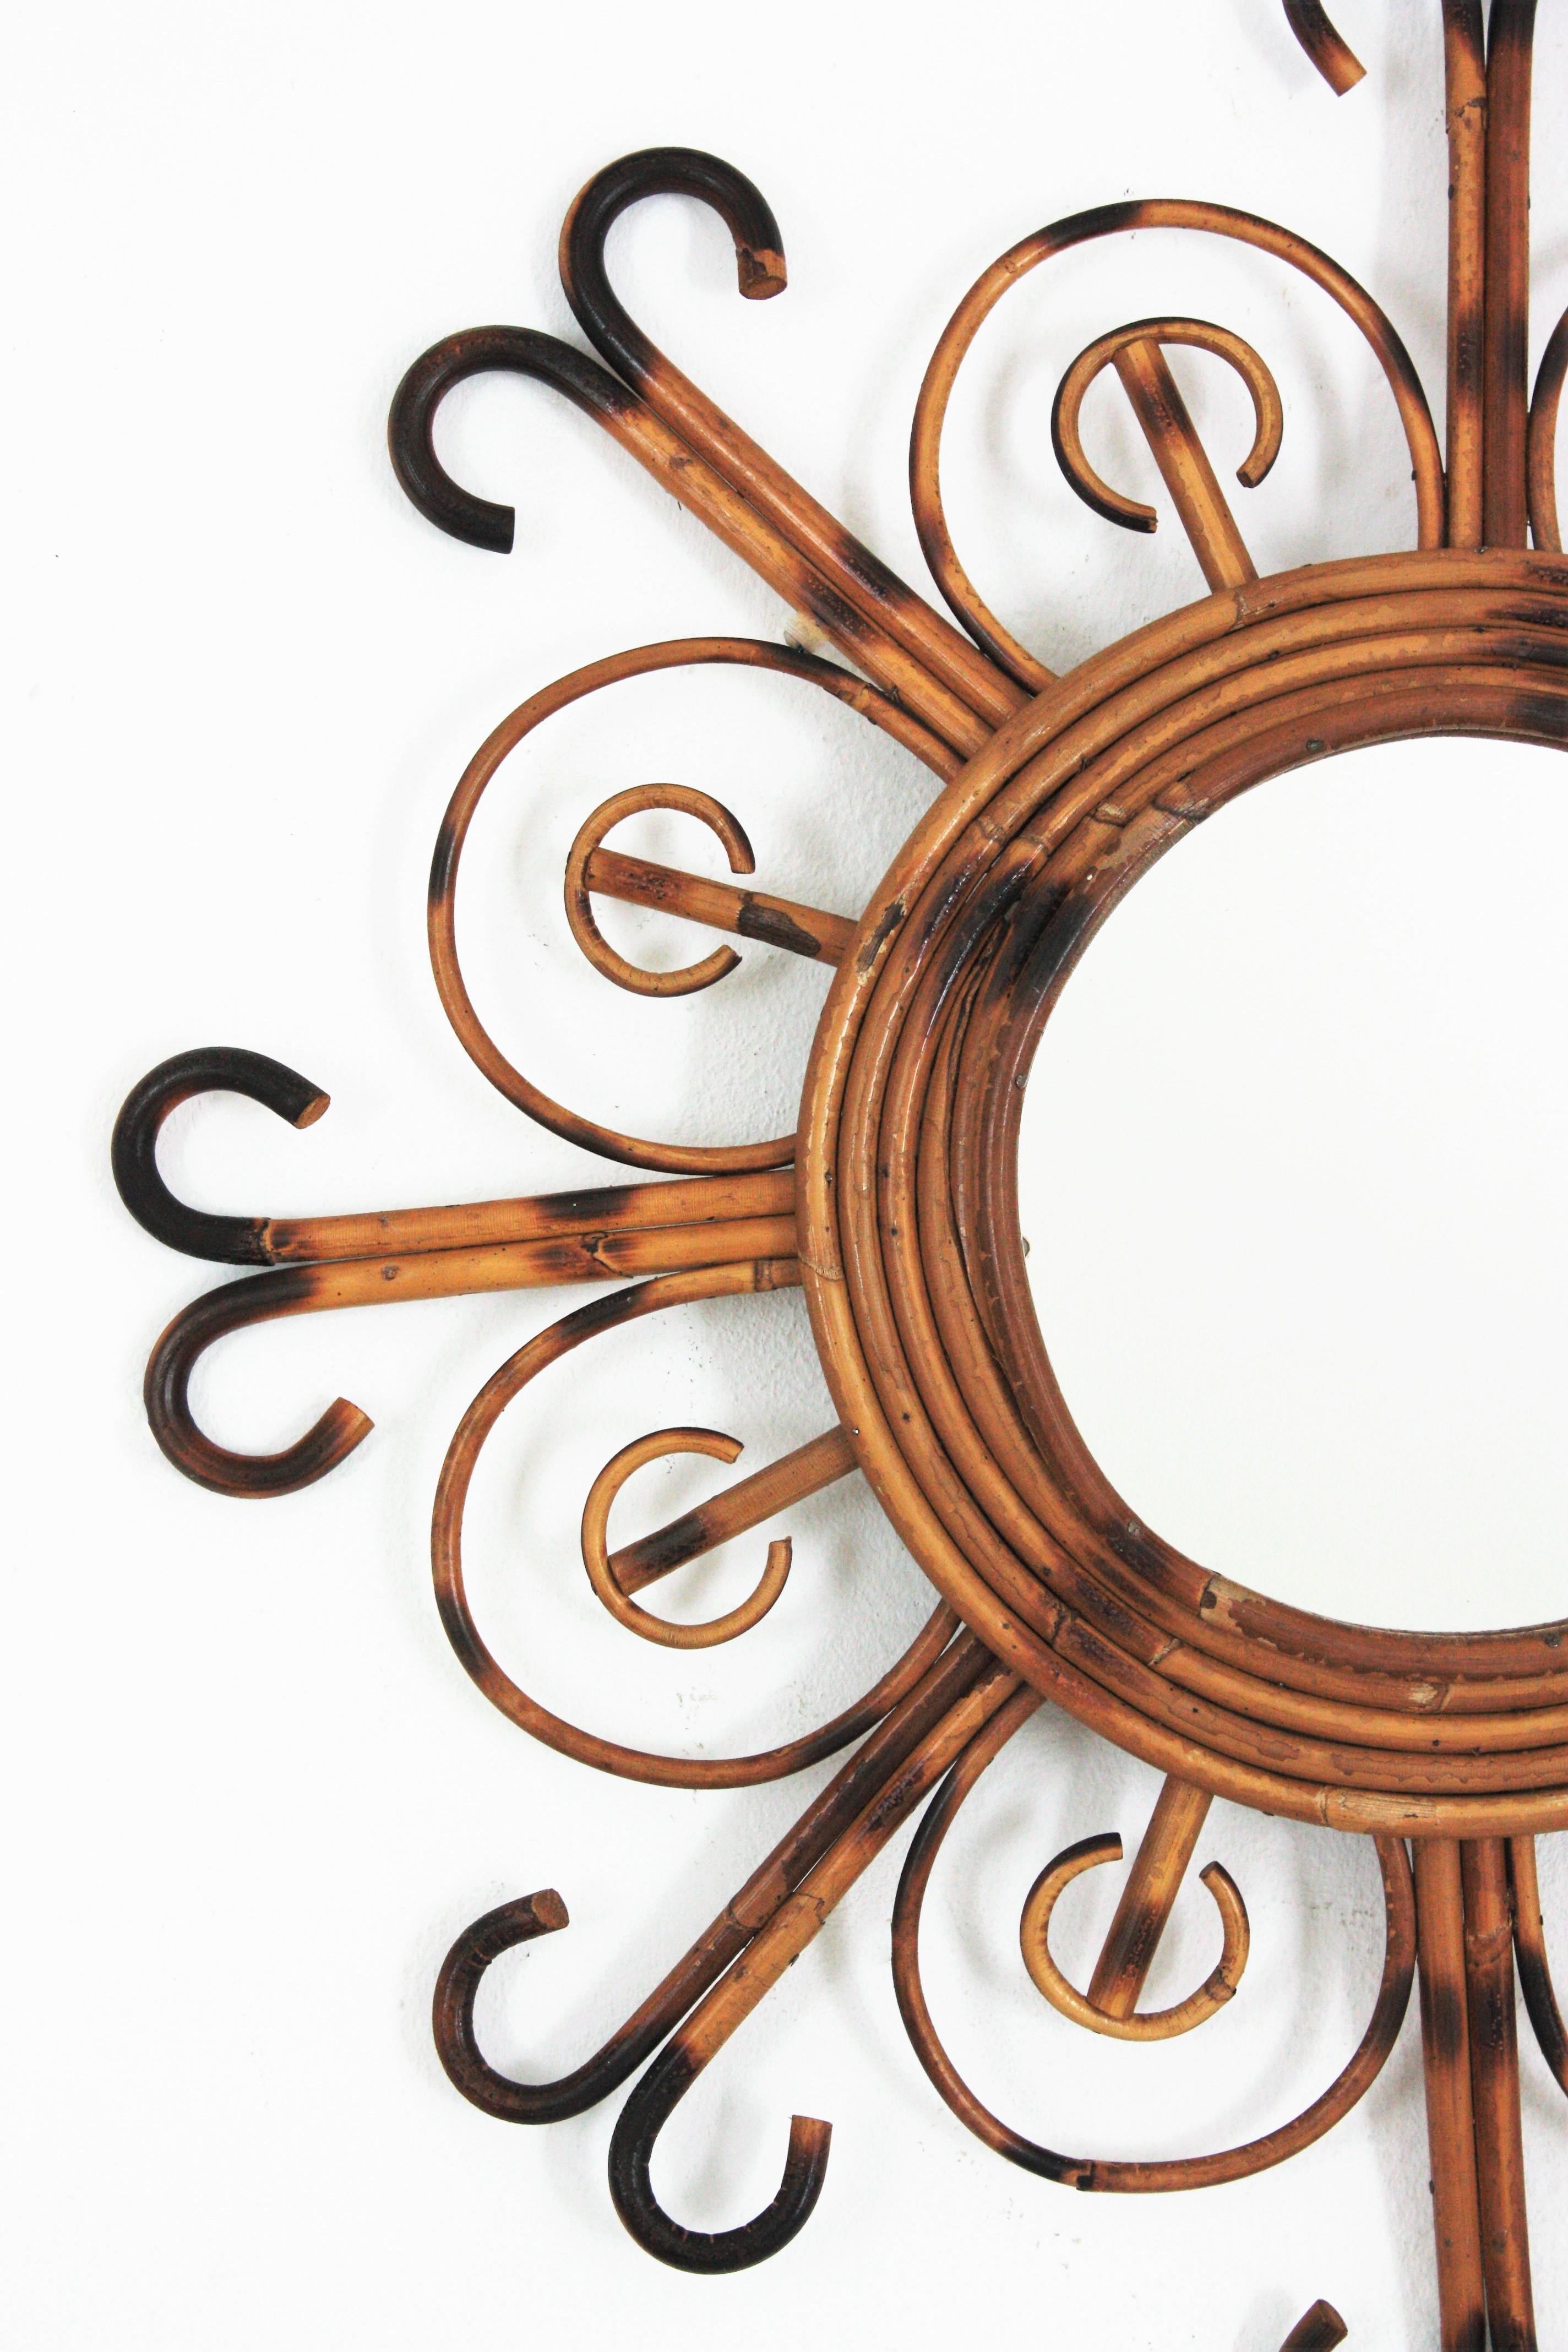 Hand-Crafted French Riviera Rattan Sunburst Mirror, 1950s For Sale